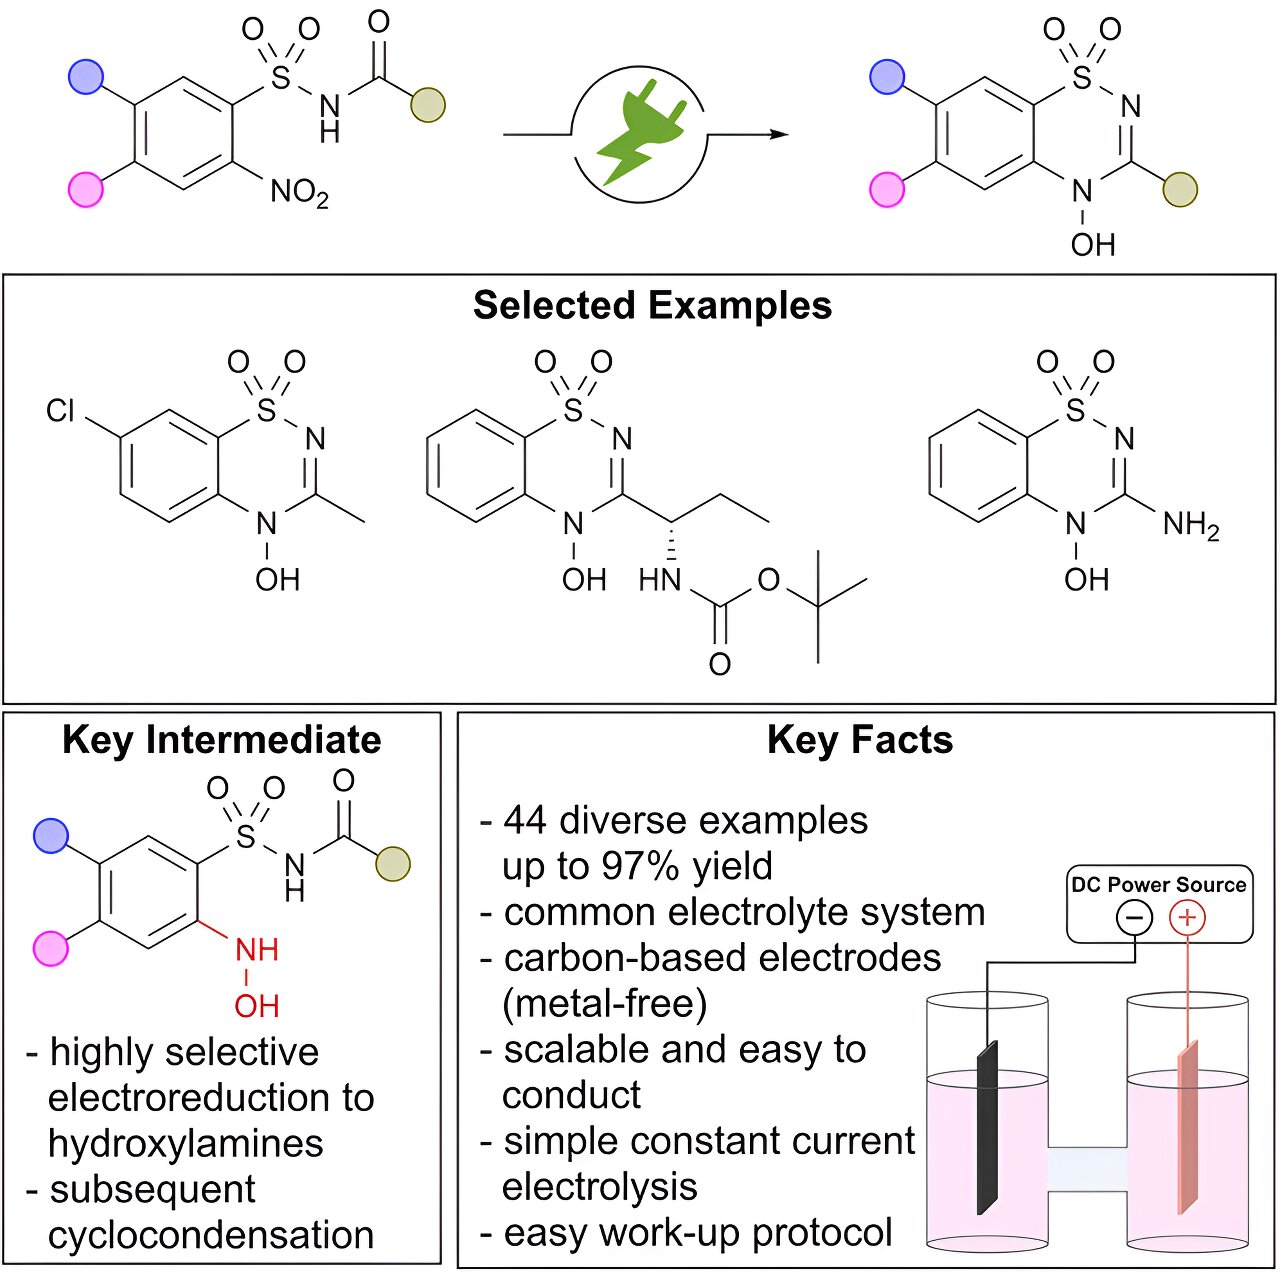 #Sustainable synthesis method reveals N-hydroxy modifications for pharmaceuticals